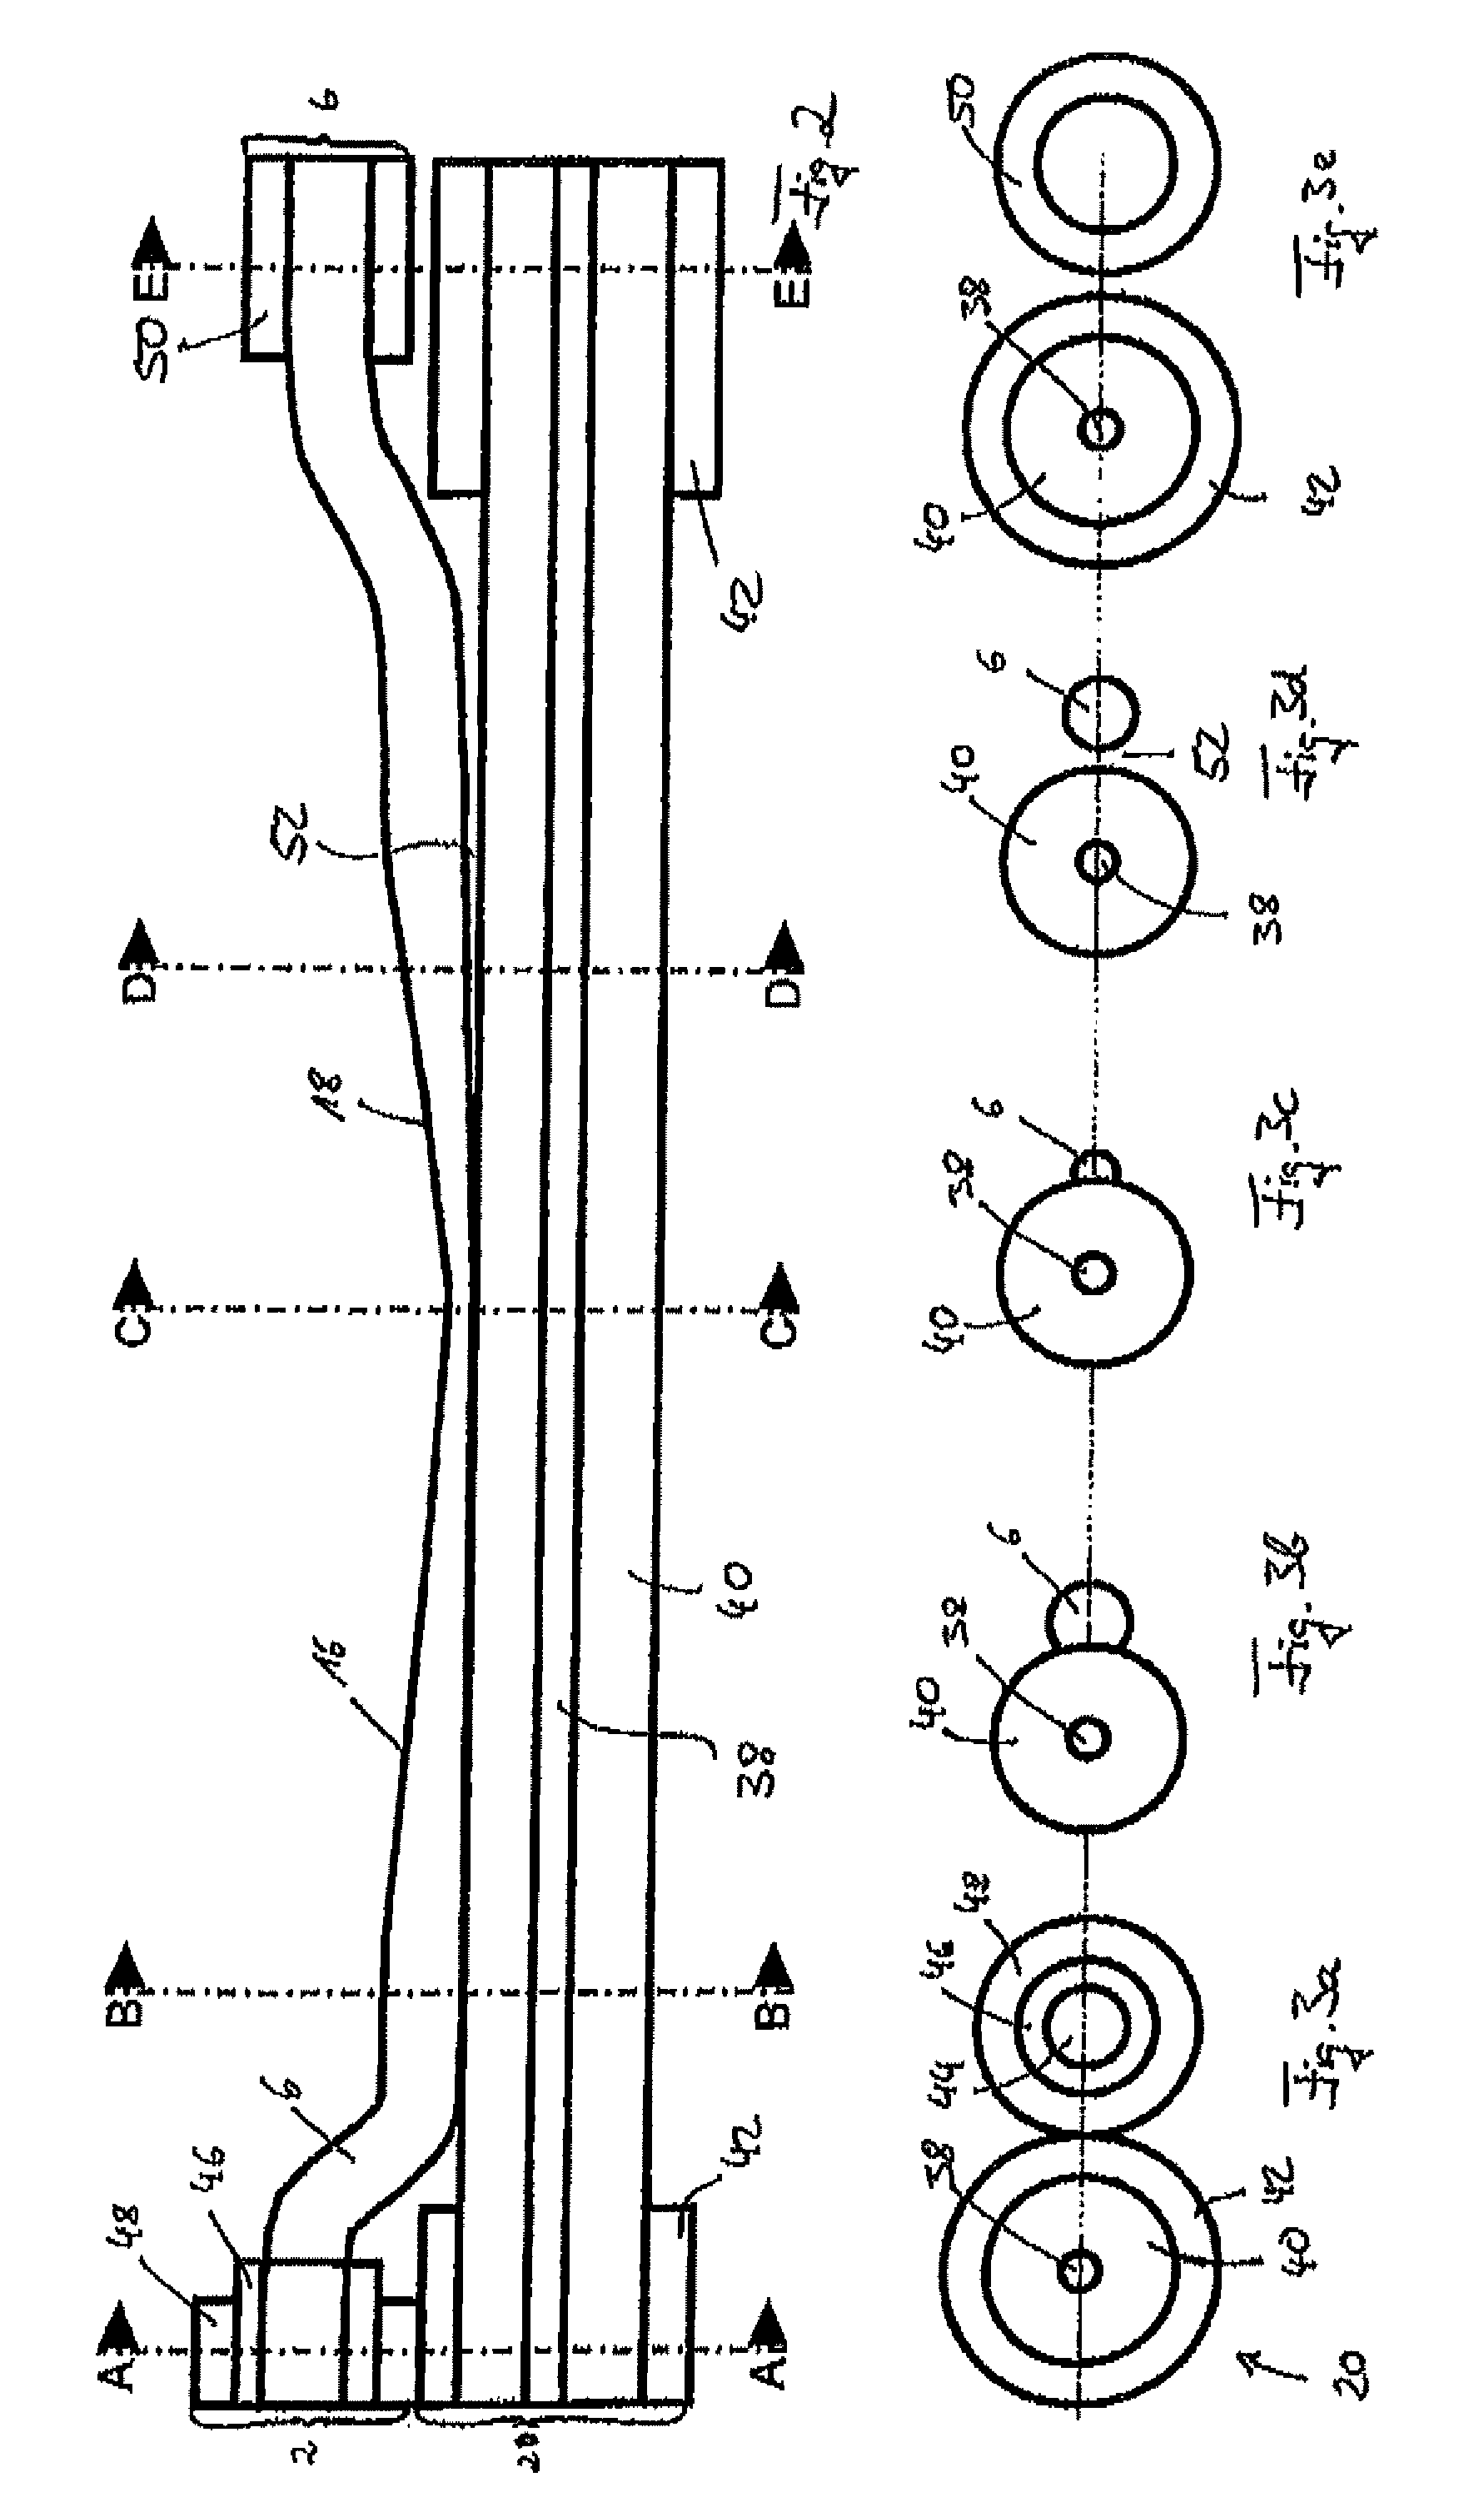 Coupling arrangement for non-axial transfer of electromagnetic radiation